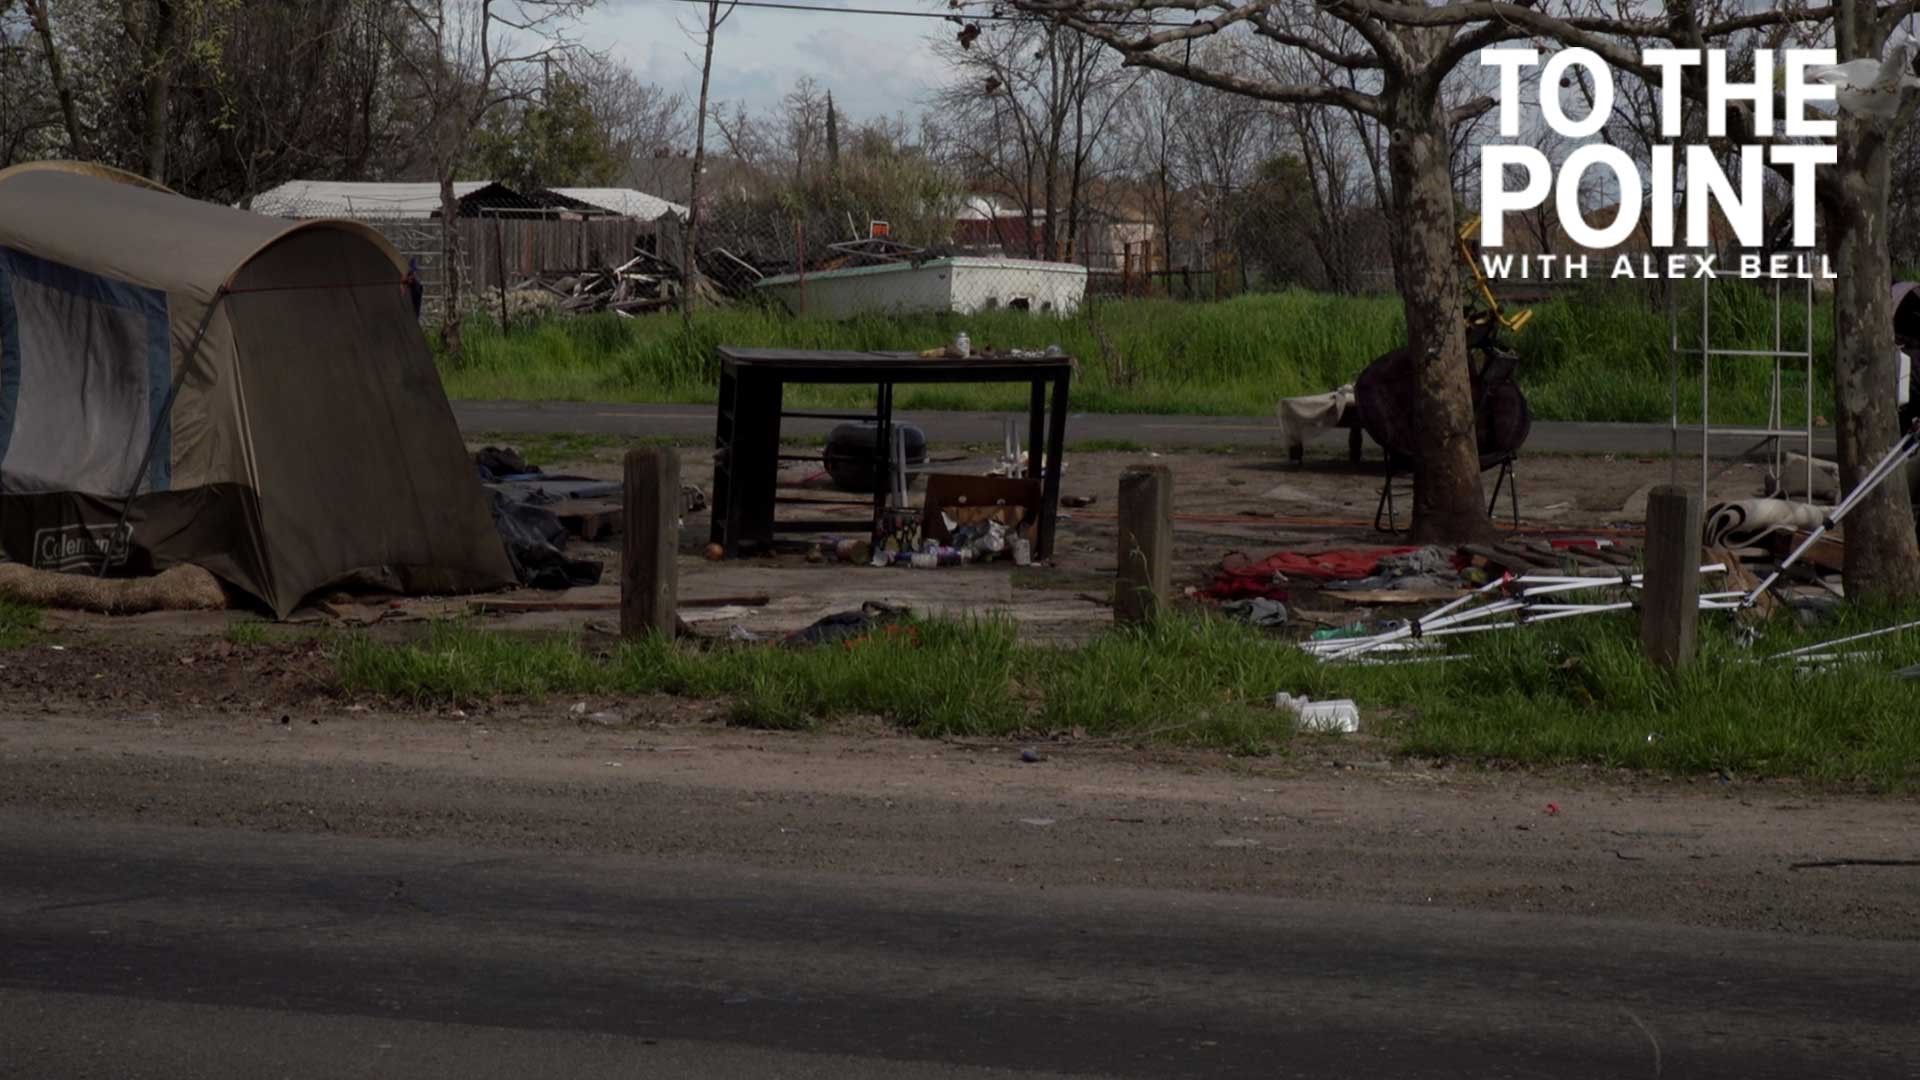 Homeowner fed up with growing homeless encampment along Rio Linda Boulevard